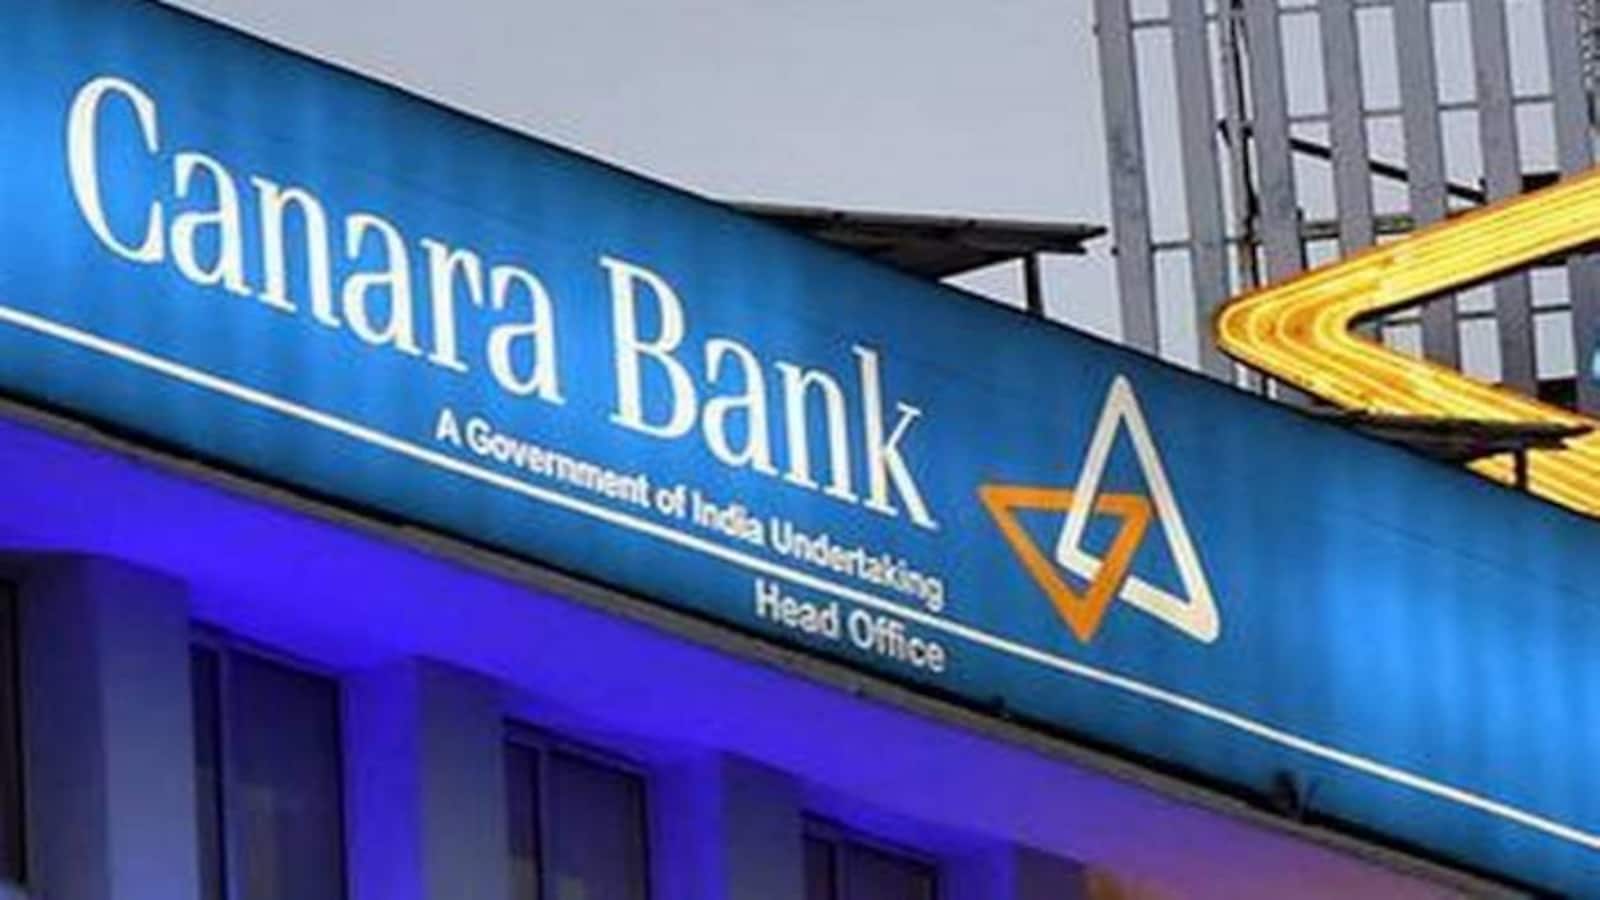 Canara Bank raises Rs 2,000 crore by issuing Basel III compliant bonds